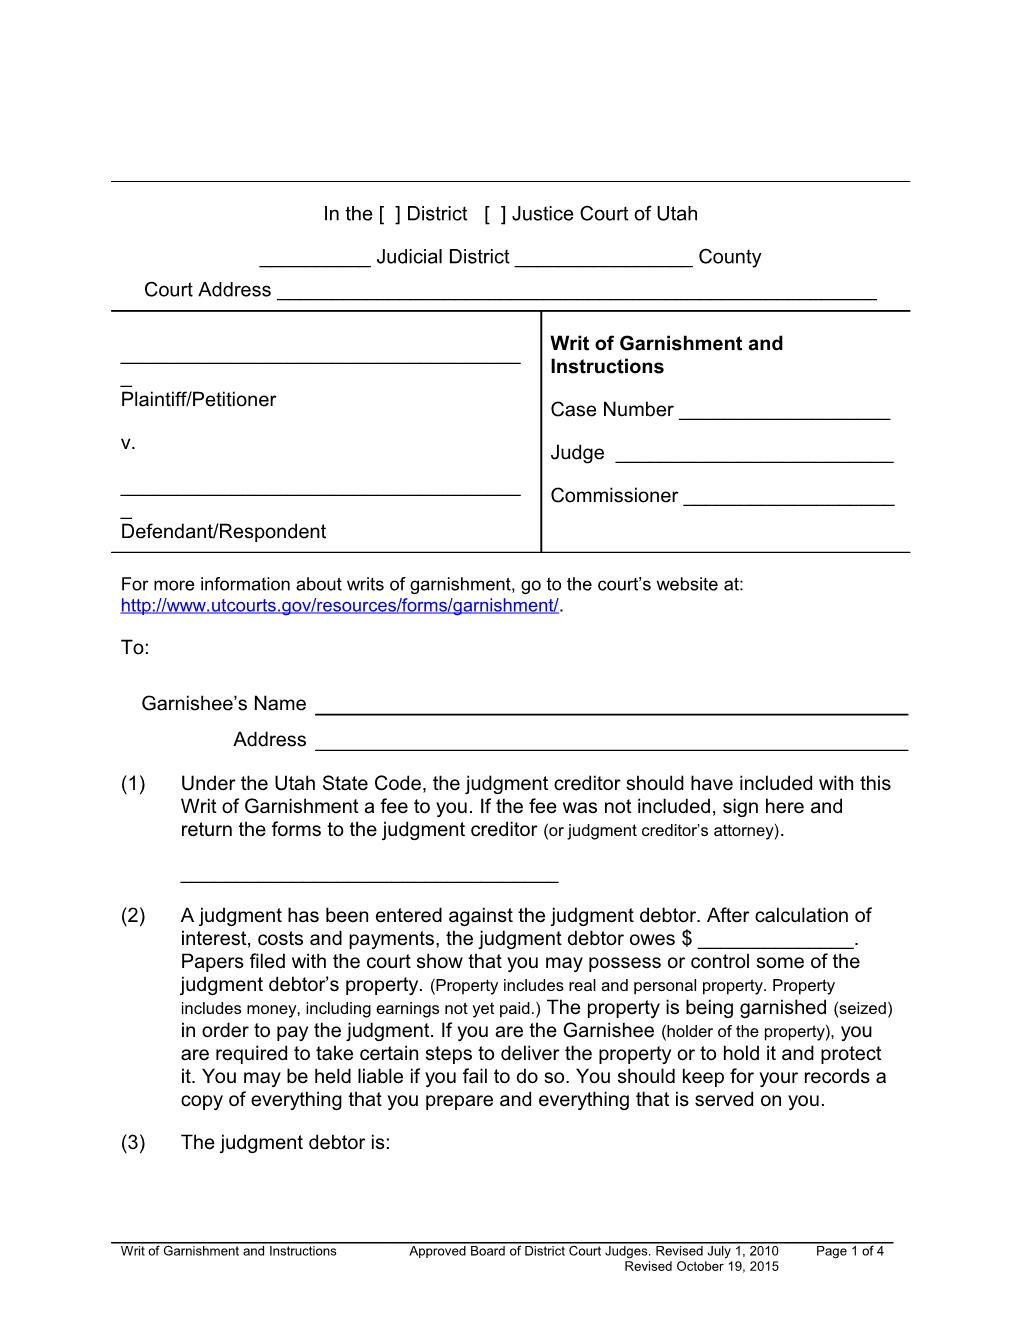 Writ Of Garnishment And Instructions